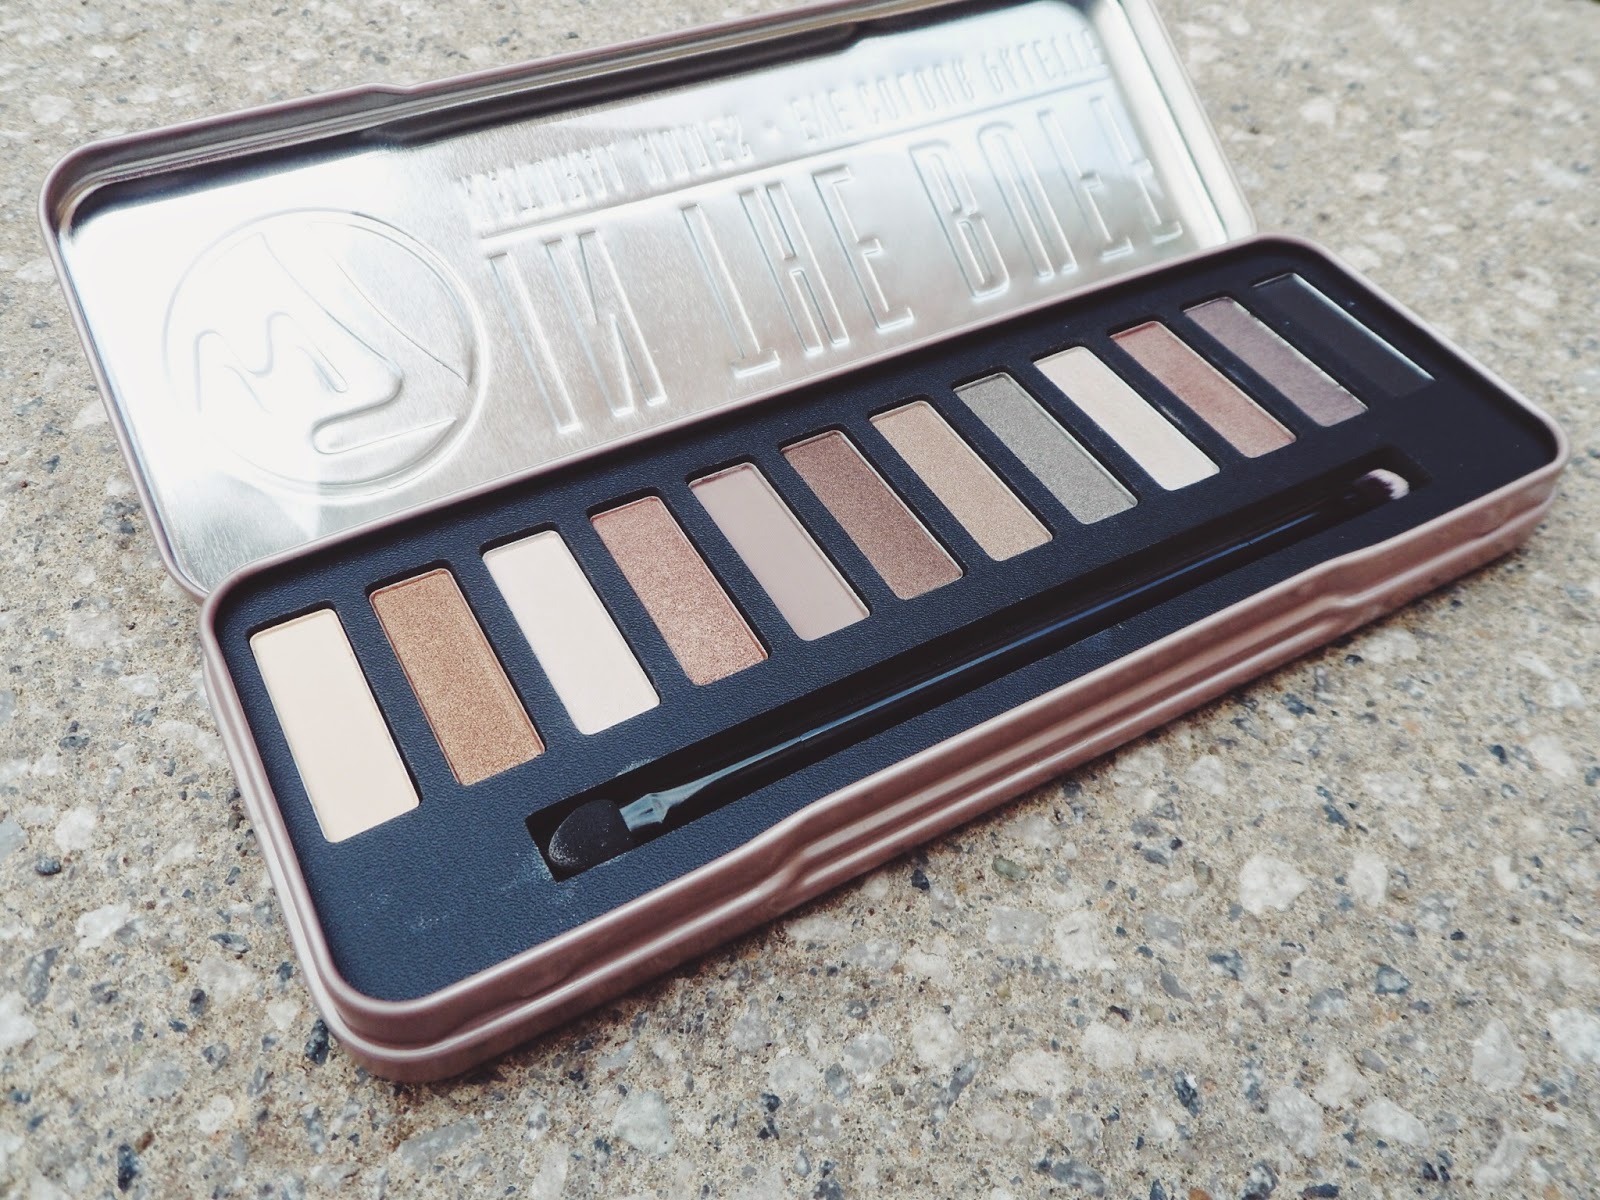 fbloggers, bbloggers, beauty, beautyblogger, beautyproduct, productreview, wiw, whatibought, motd, w7inthebuff, inthebuff, w7, urbandecay, nakedpalette, urbandecaynakedpalette